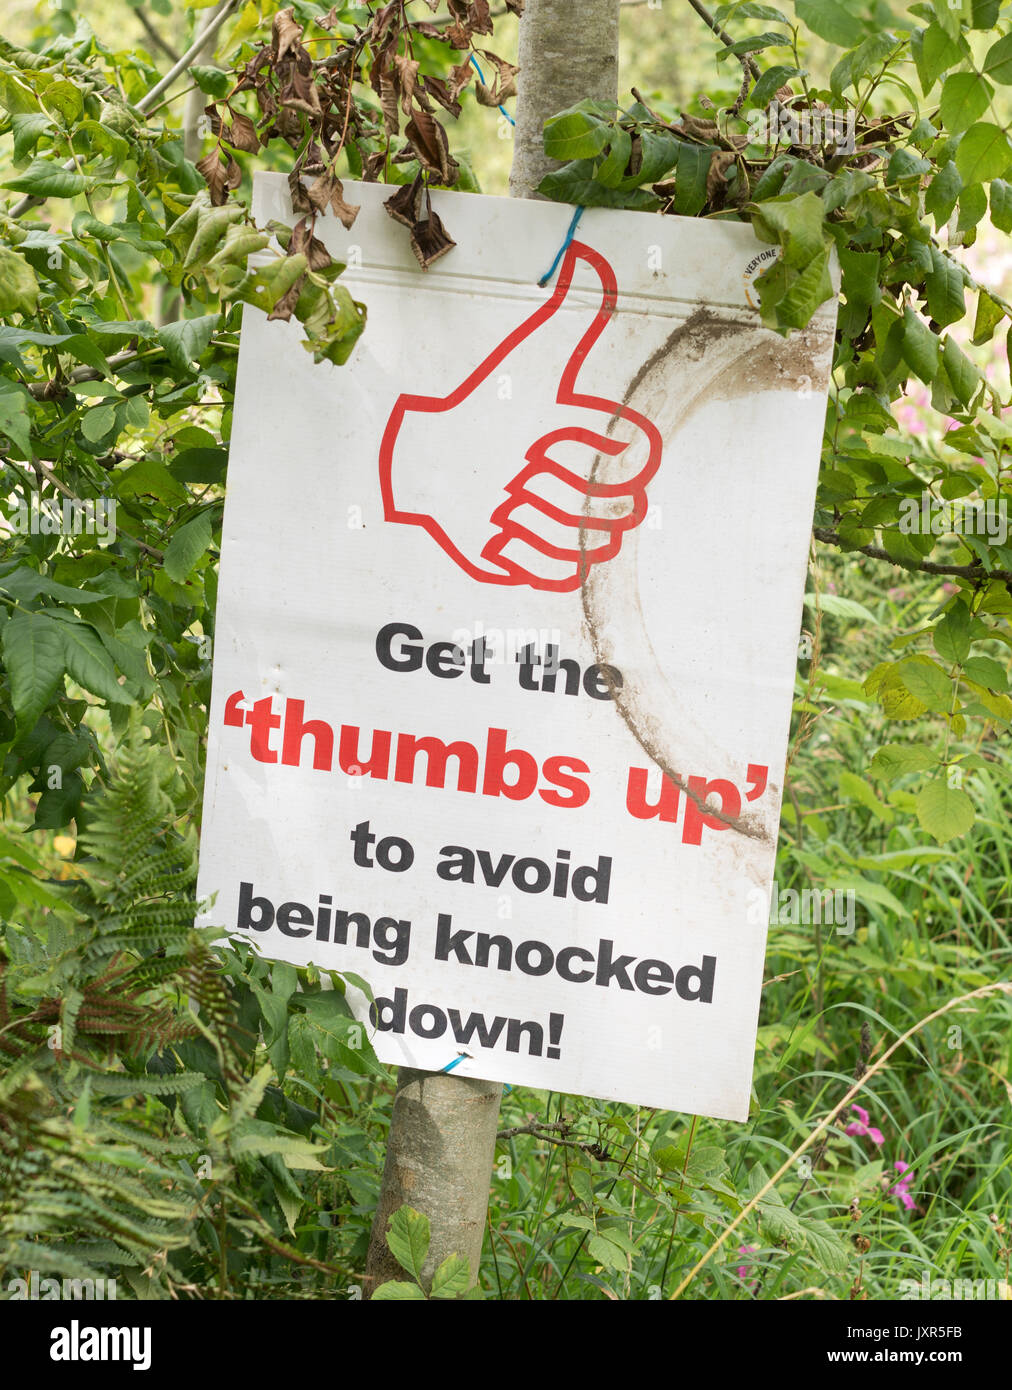 Building contractor's sign Get the thumbs up to avoid being knocked down, England, UK Stock Photo